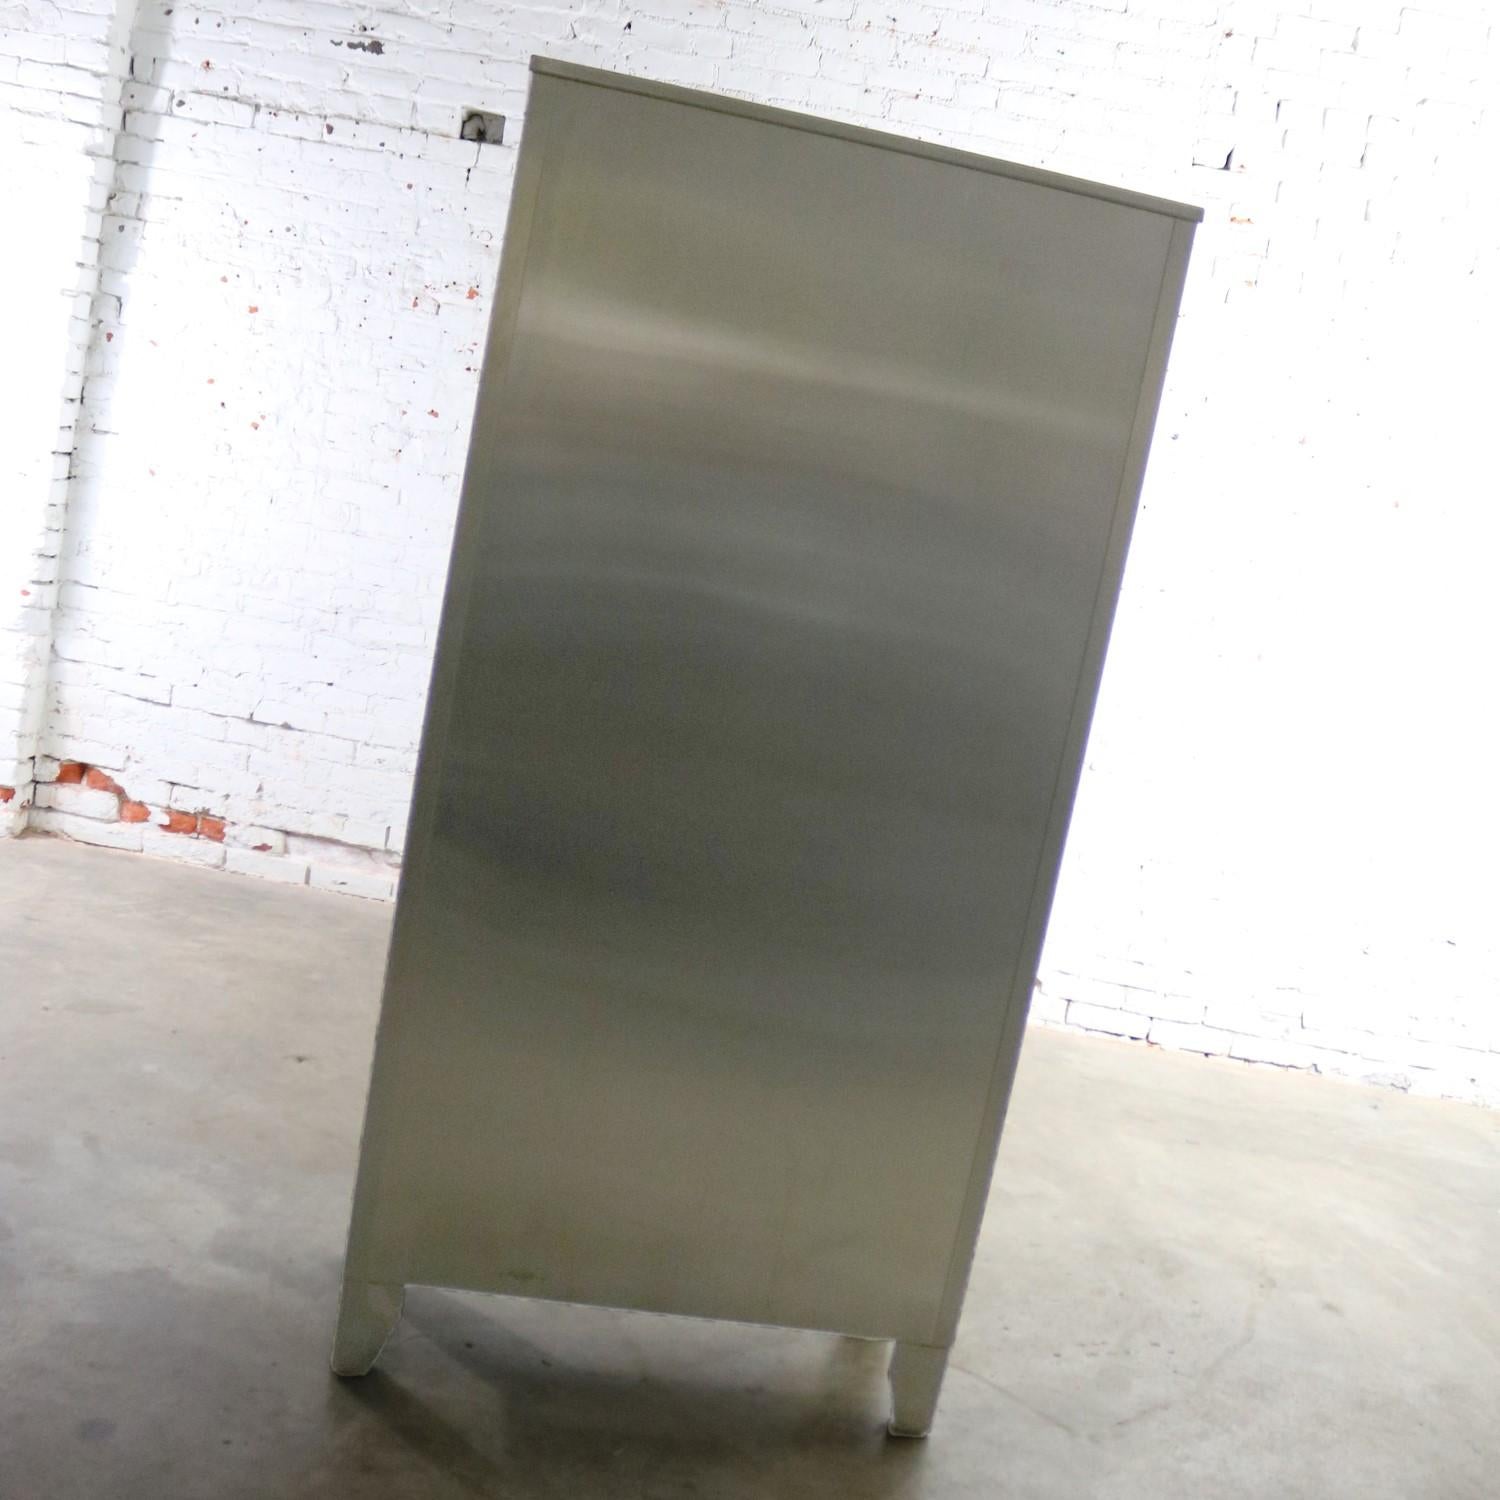 Stainless Steel Industrial Display Apothecary Medical Cabinet with Glass Doors 6 6